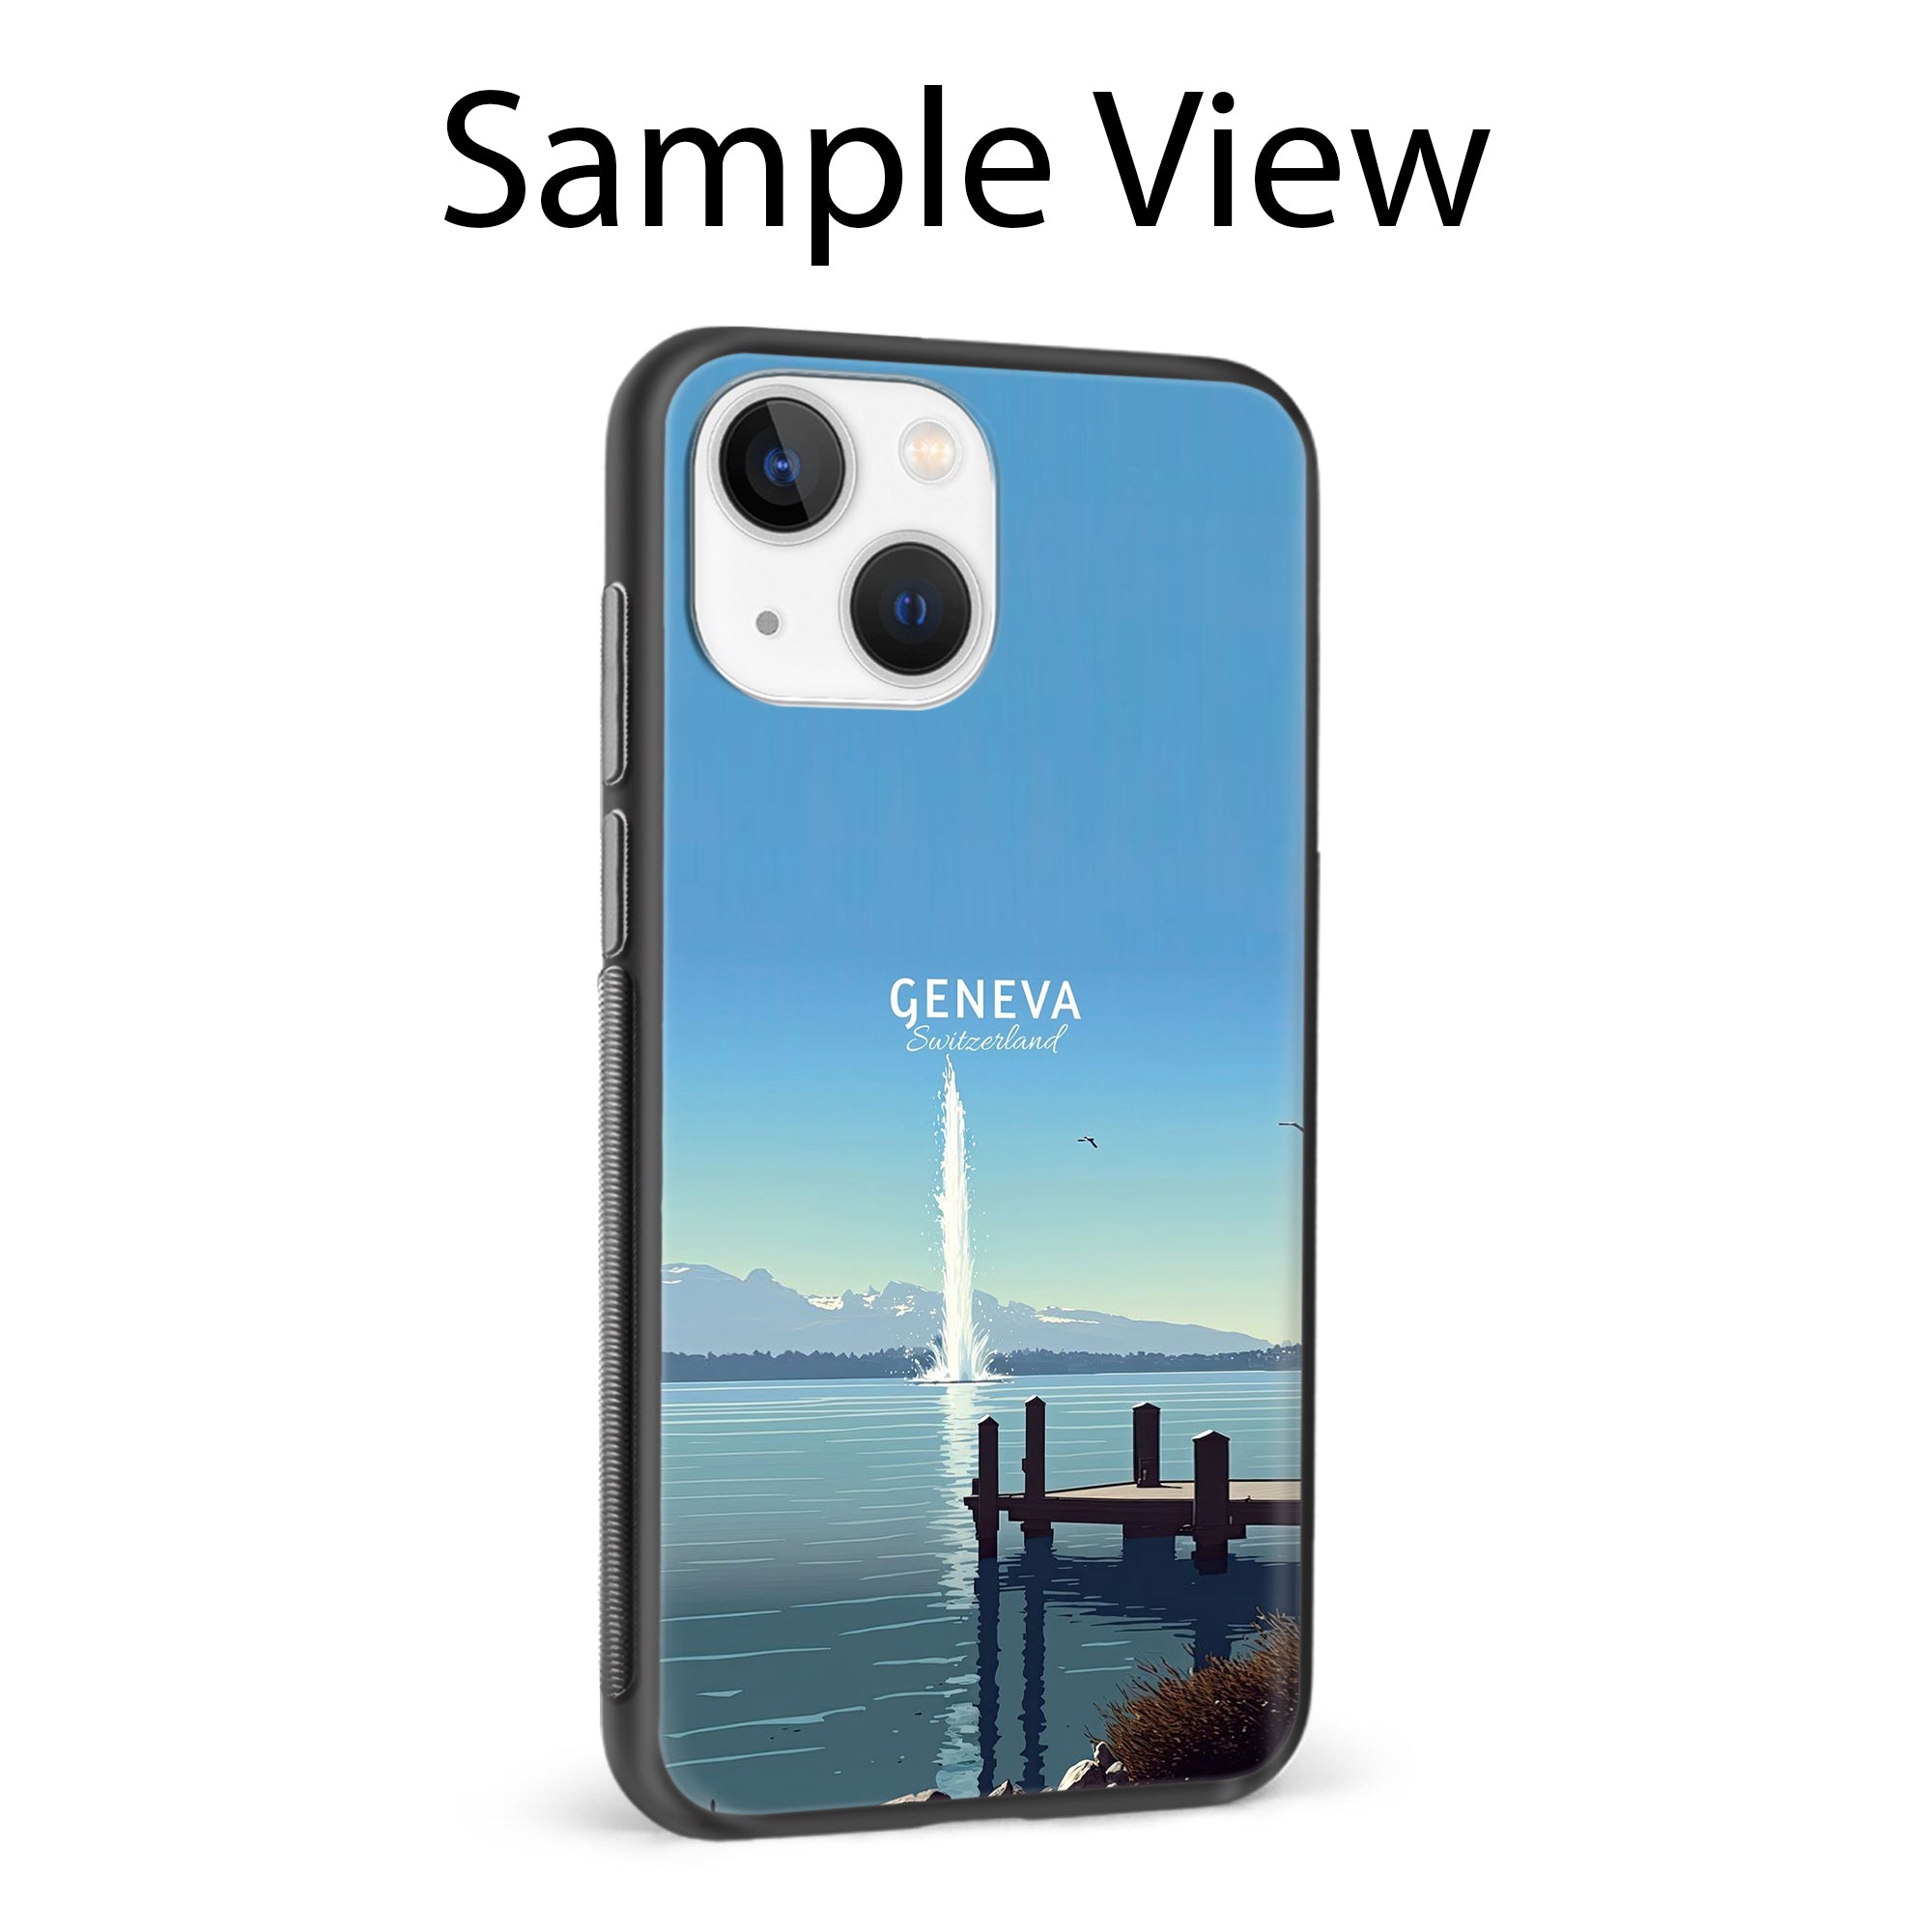 Buy Geneva Metal-Silicon Back Mobile Phone Case/Cover For Samsung Galaxy A50 / A50s / A30s Online